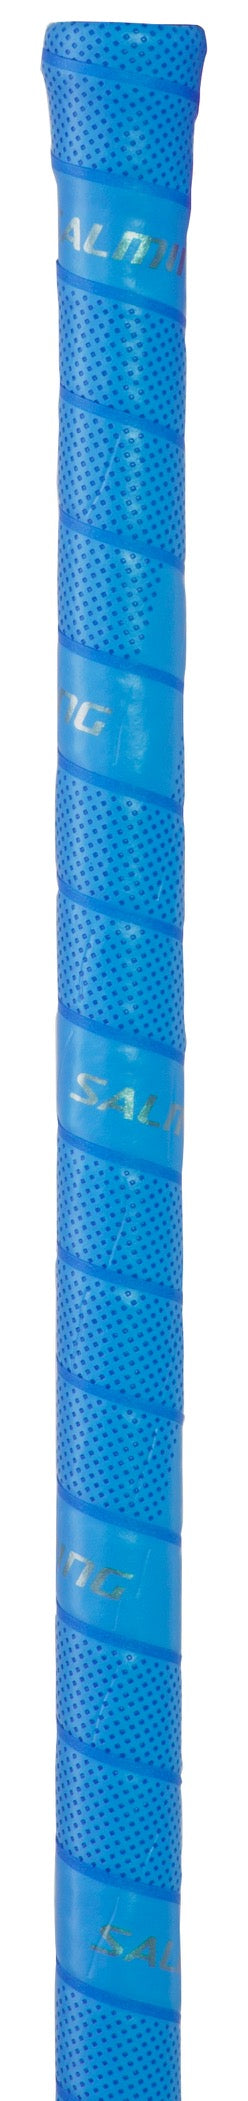 Salming Ultimate Replacement Floorball Grip - Blue